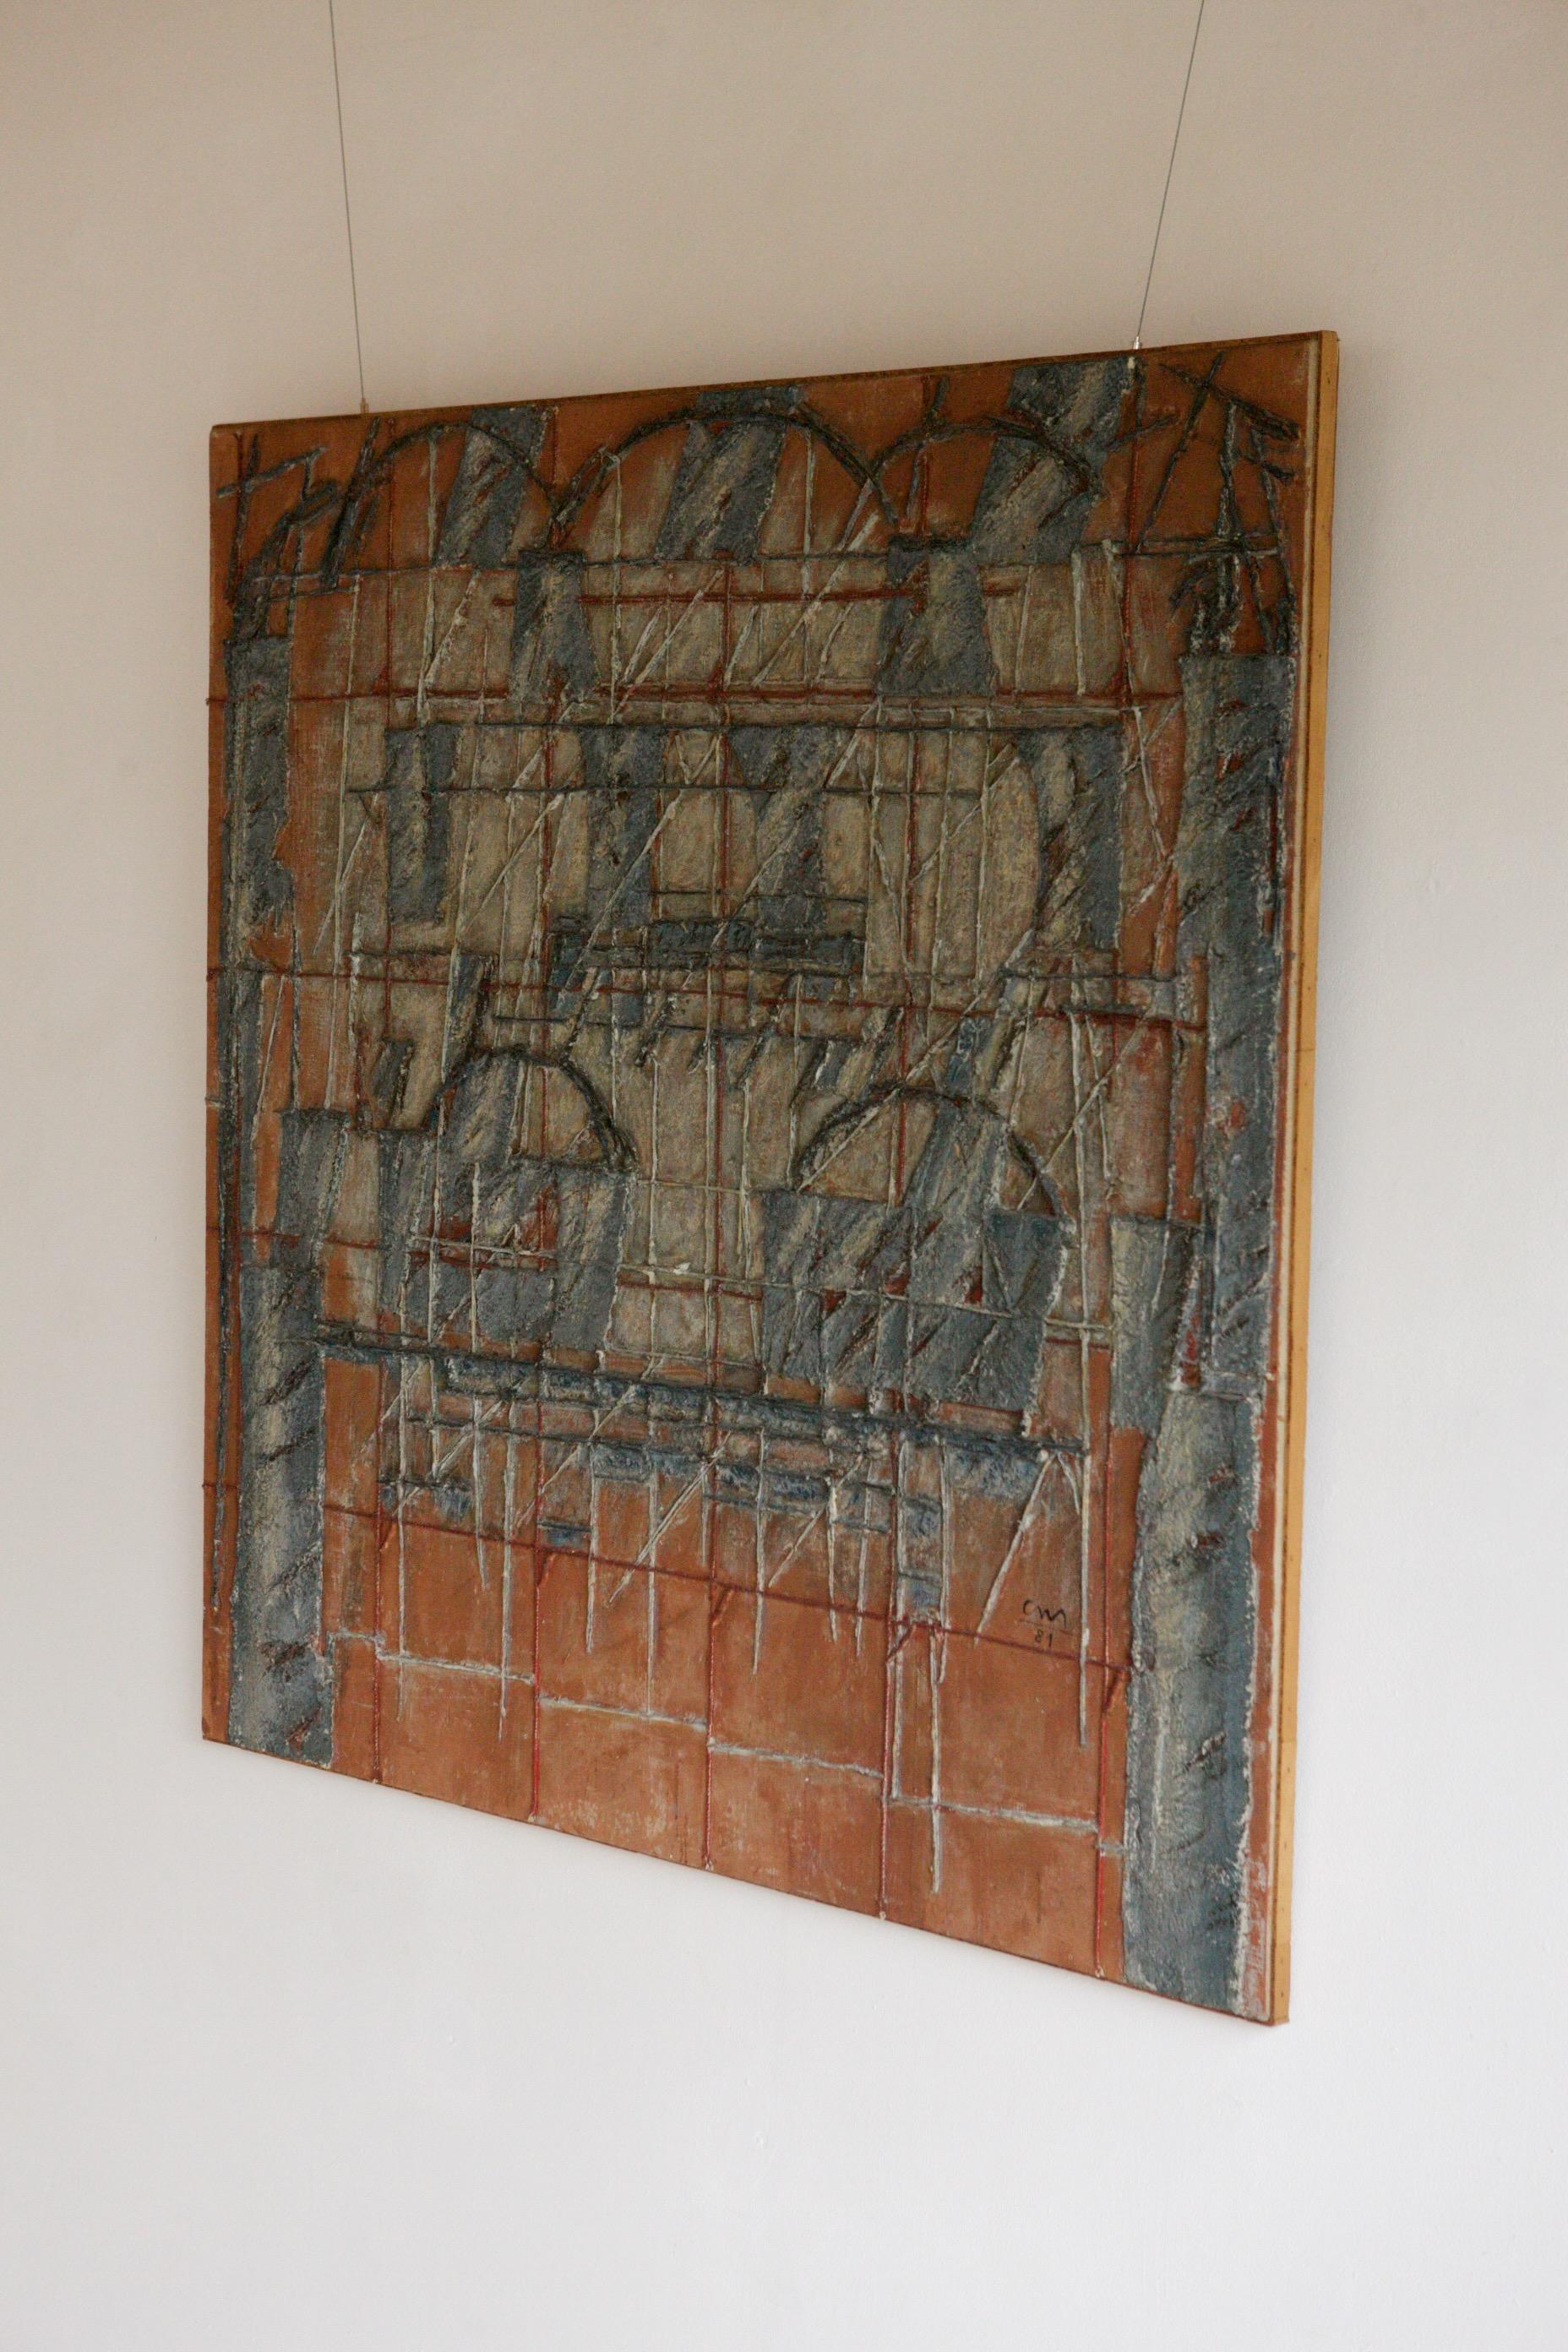 French Brutalist mixed media 1981. Oil, String and Paper on Canvas